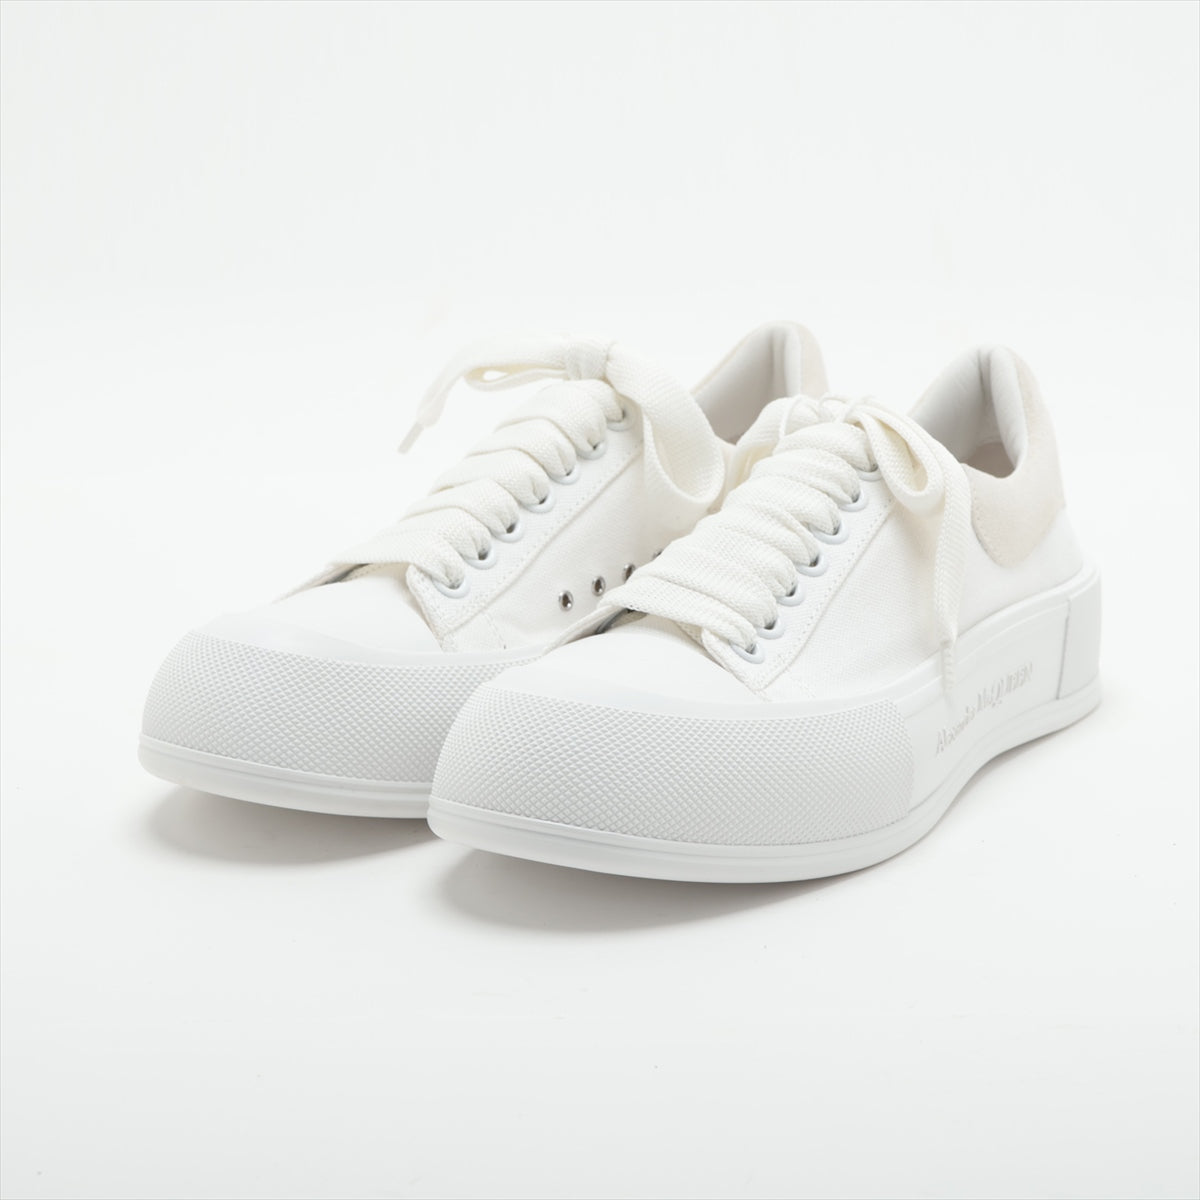 Alexander McQueen Canvas & leather Sneakers 39 Ladies' White 654593 Is there a replacement string